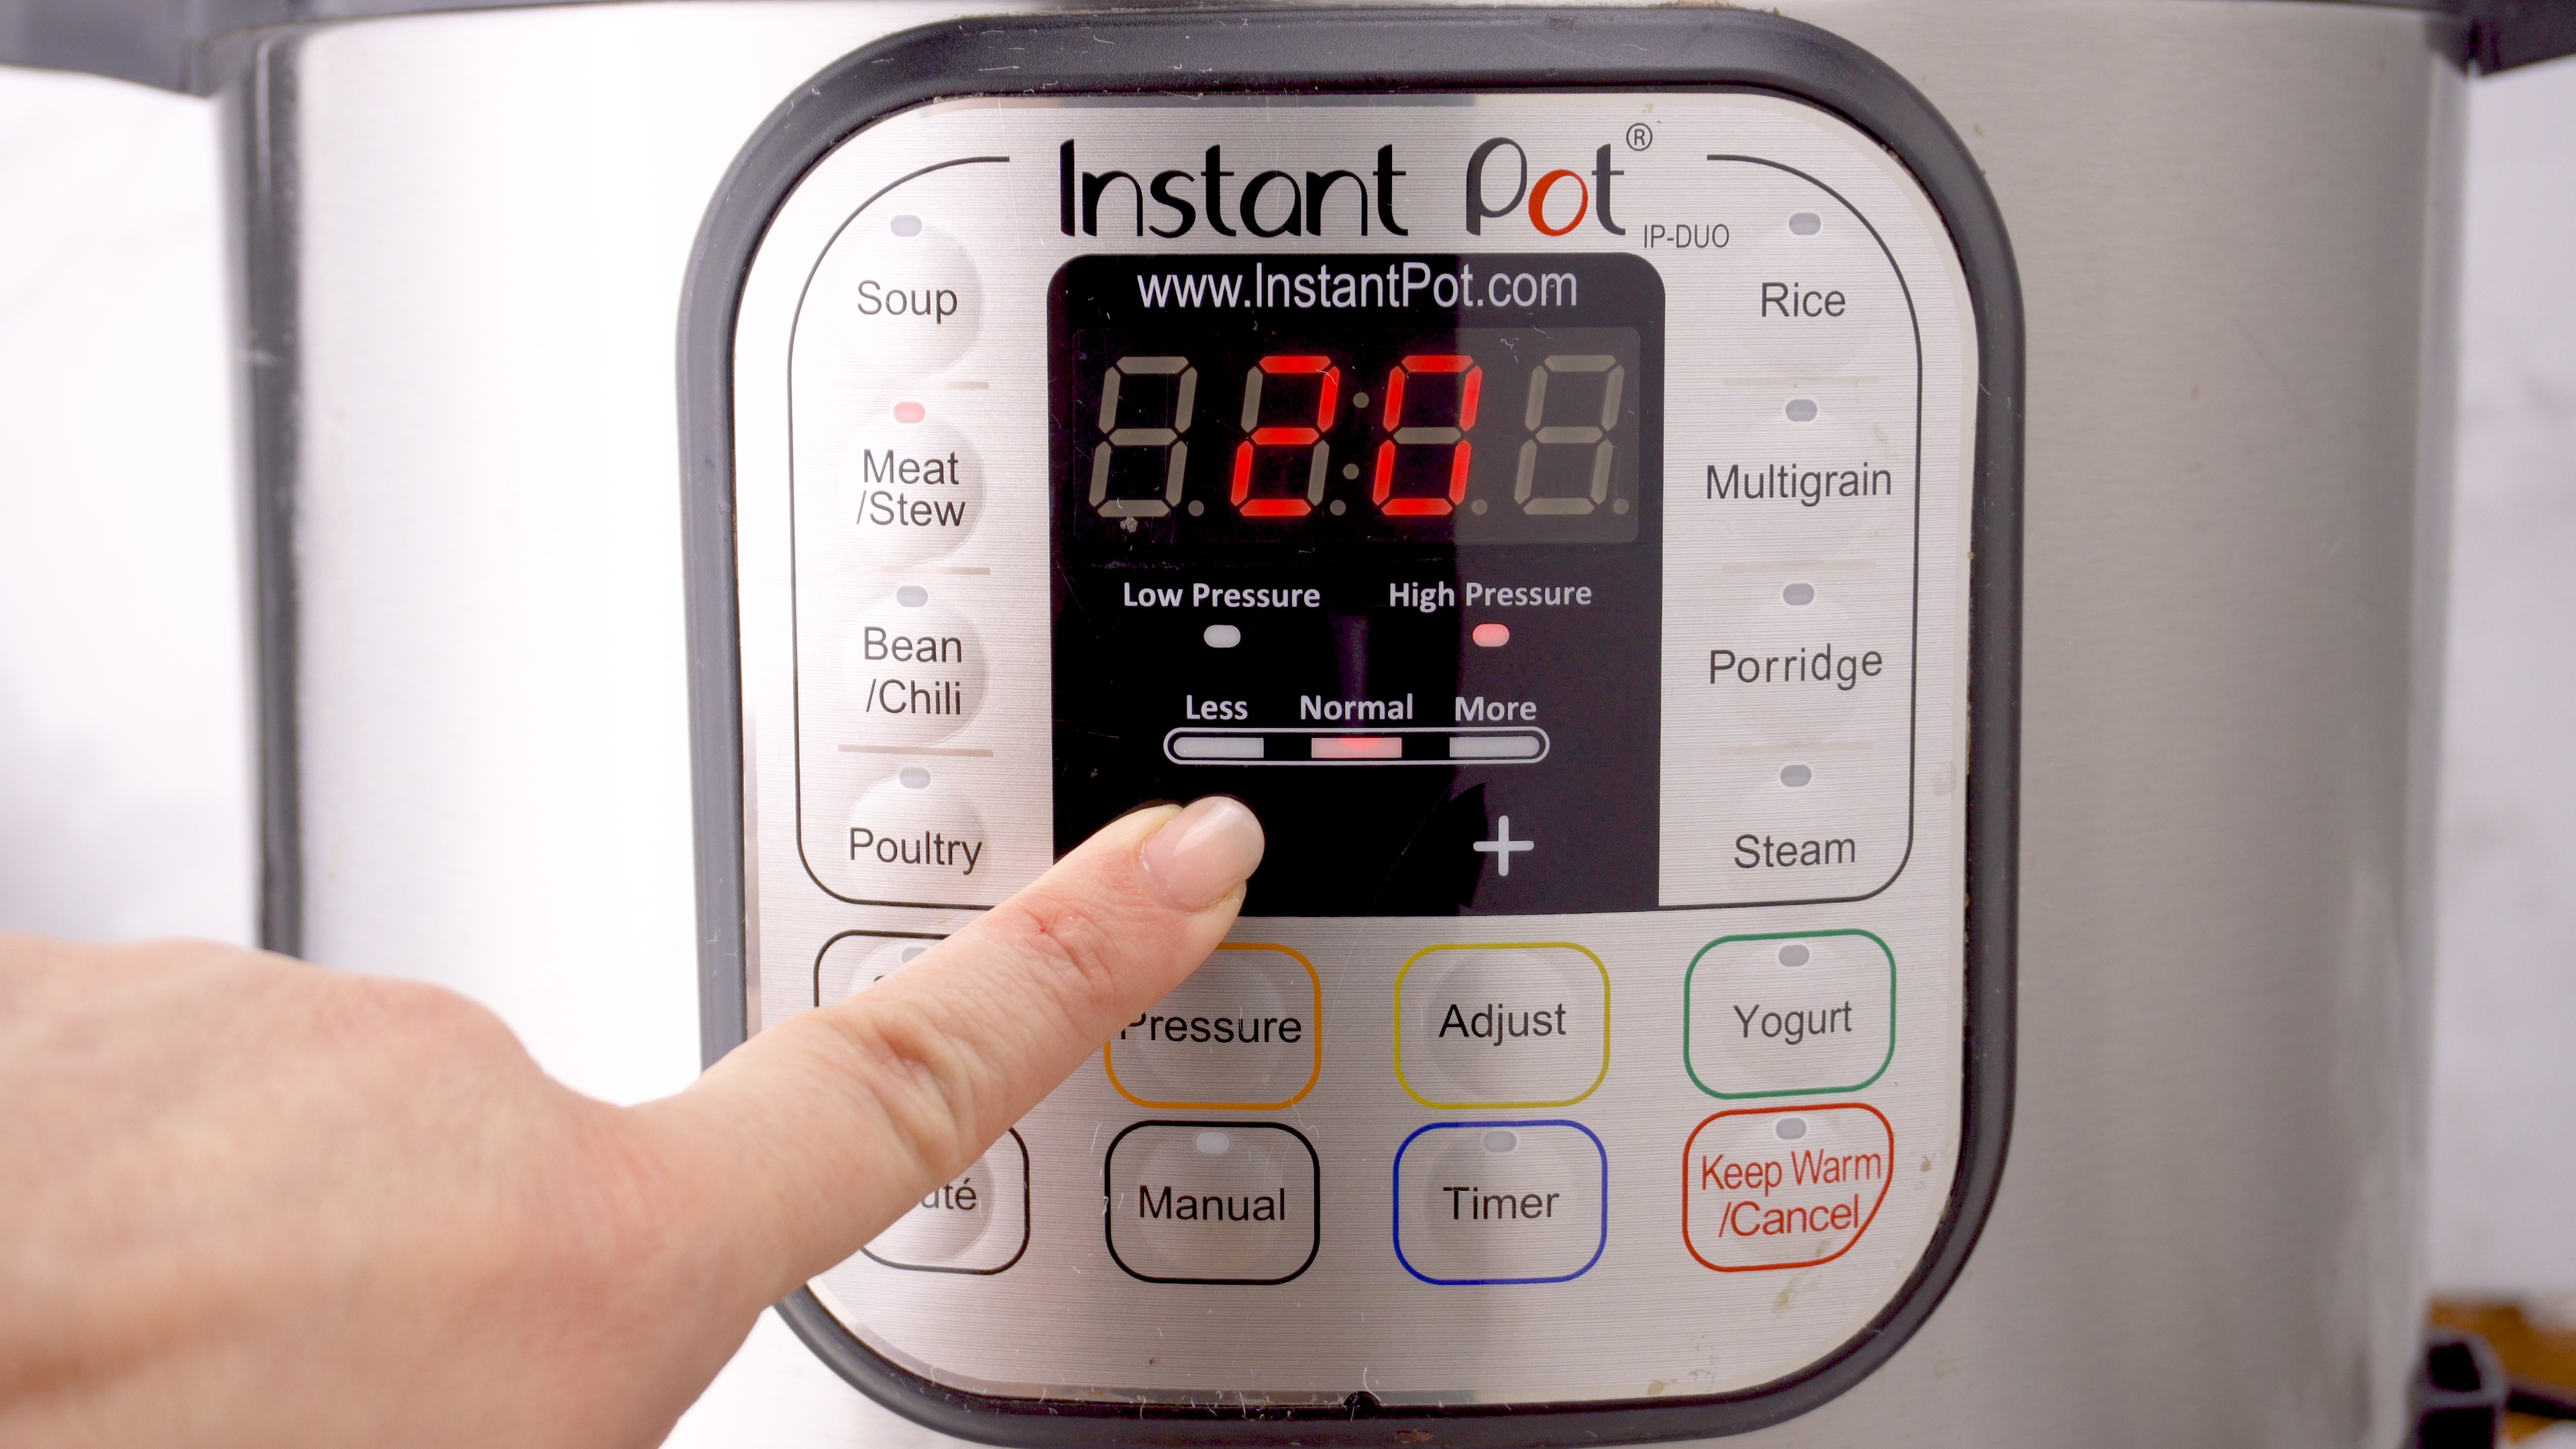 Changing cook time on the Instant Pot